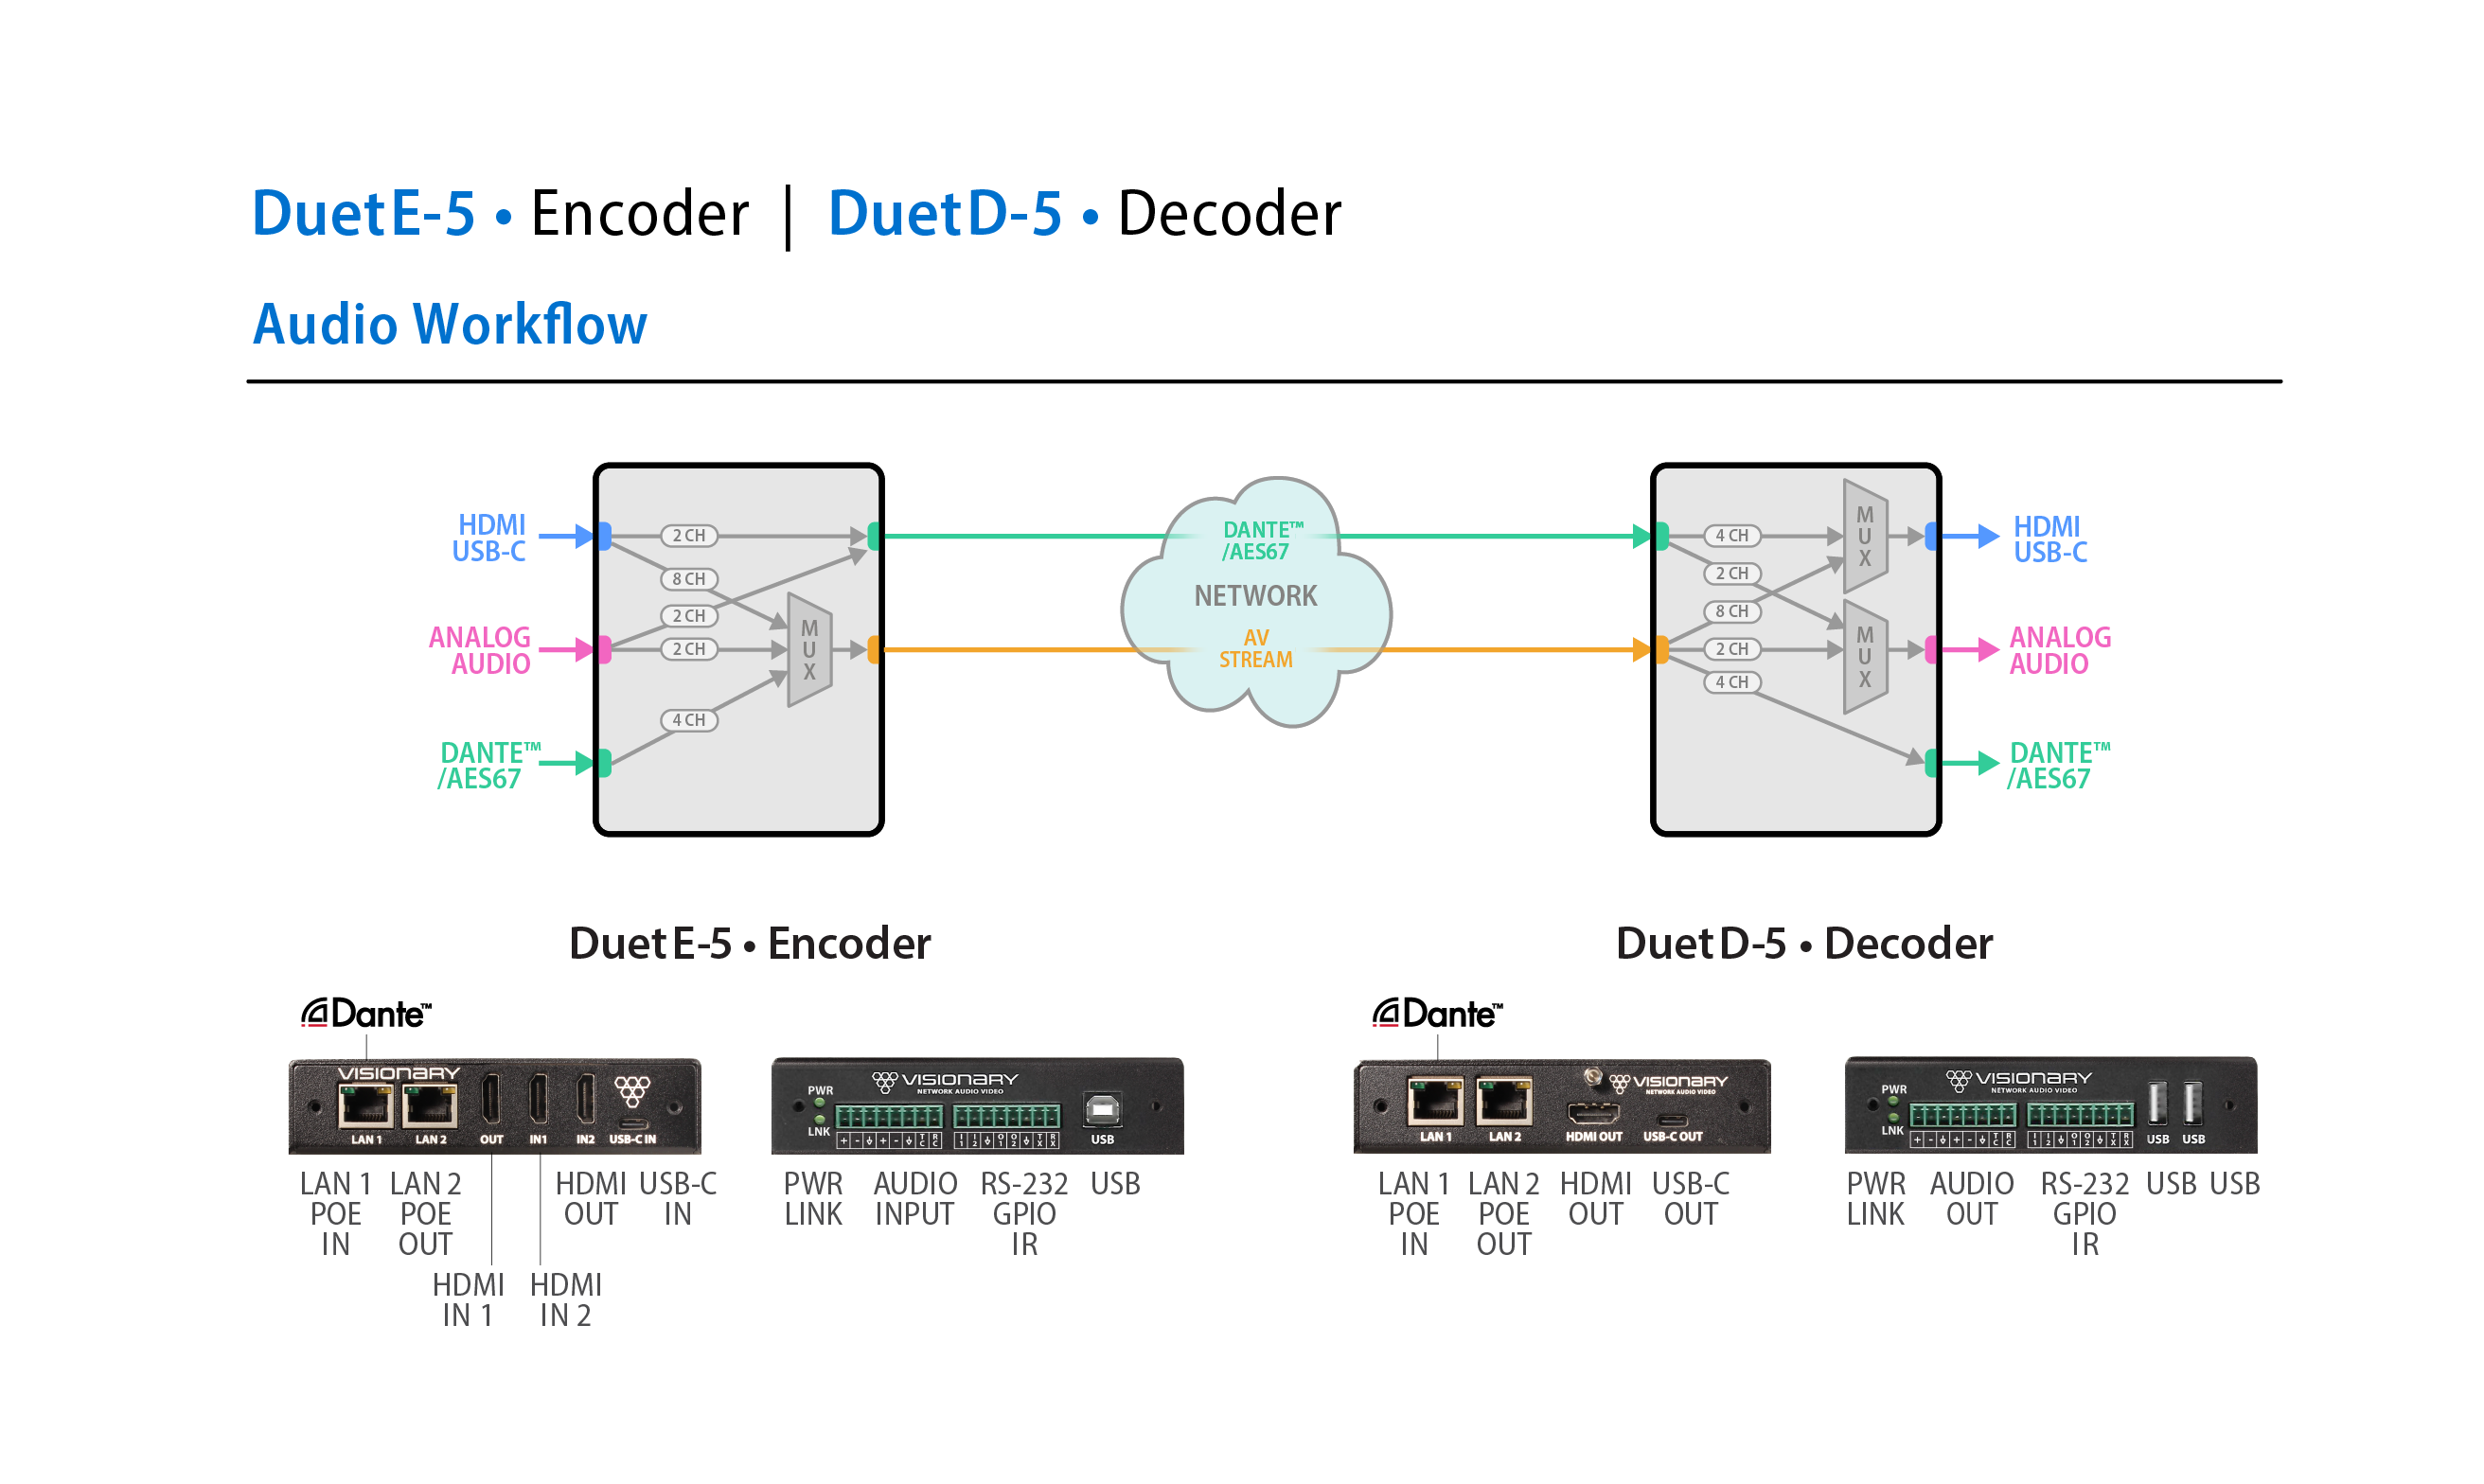 DuetED-5 Workflow